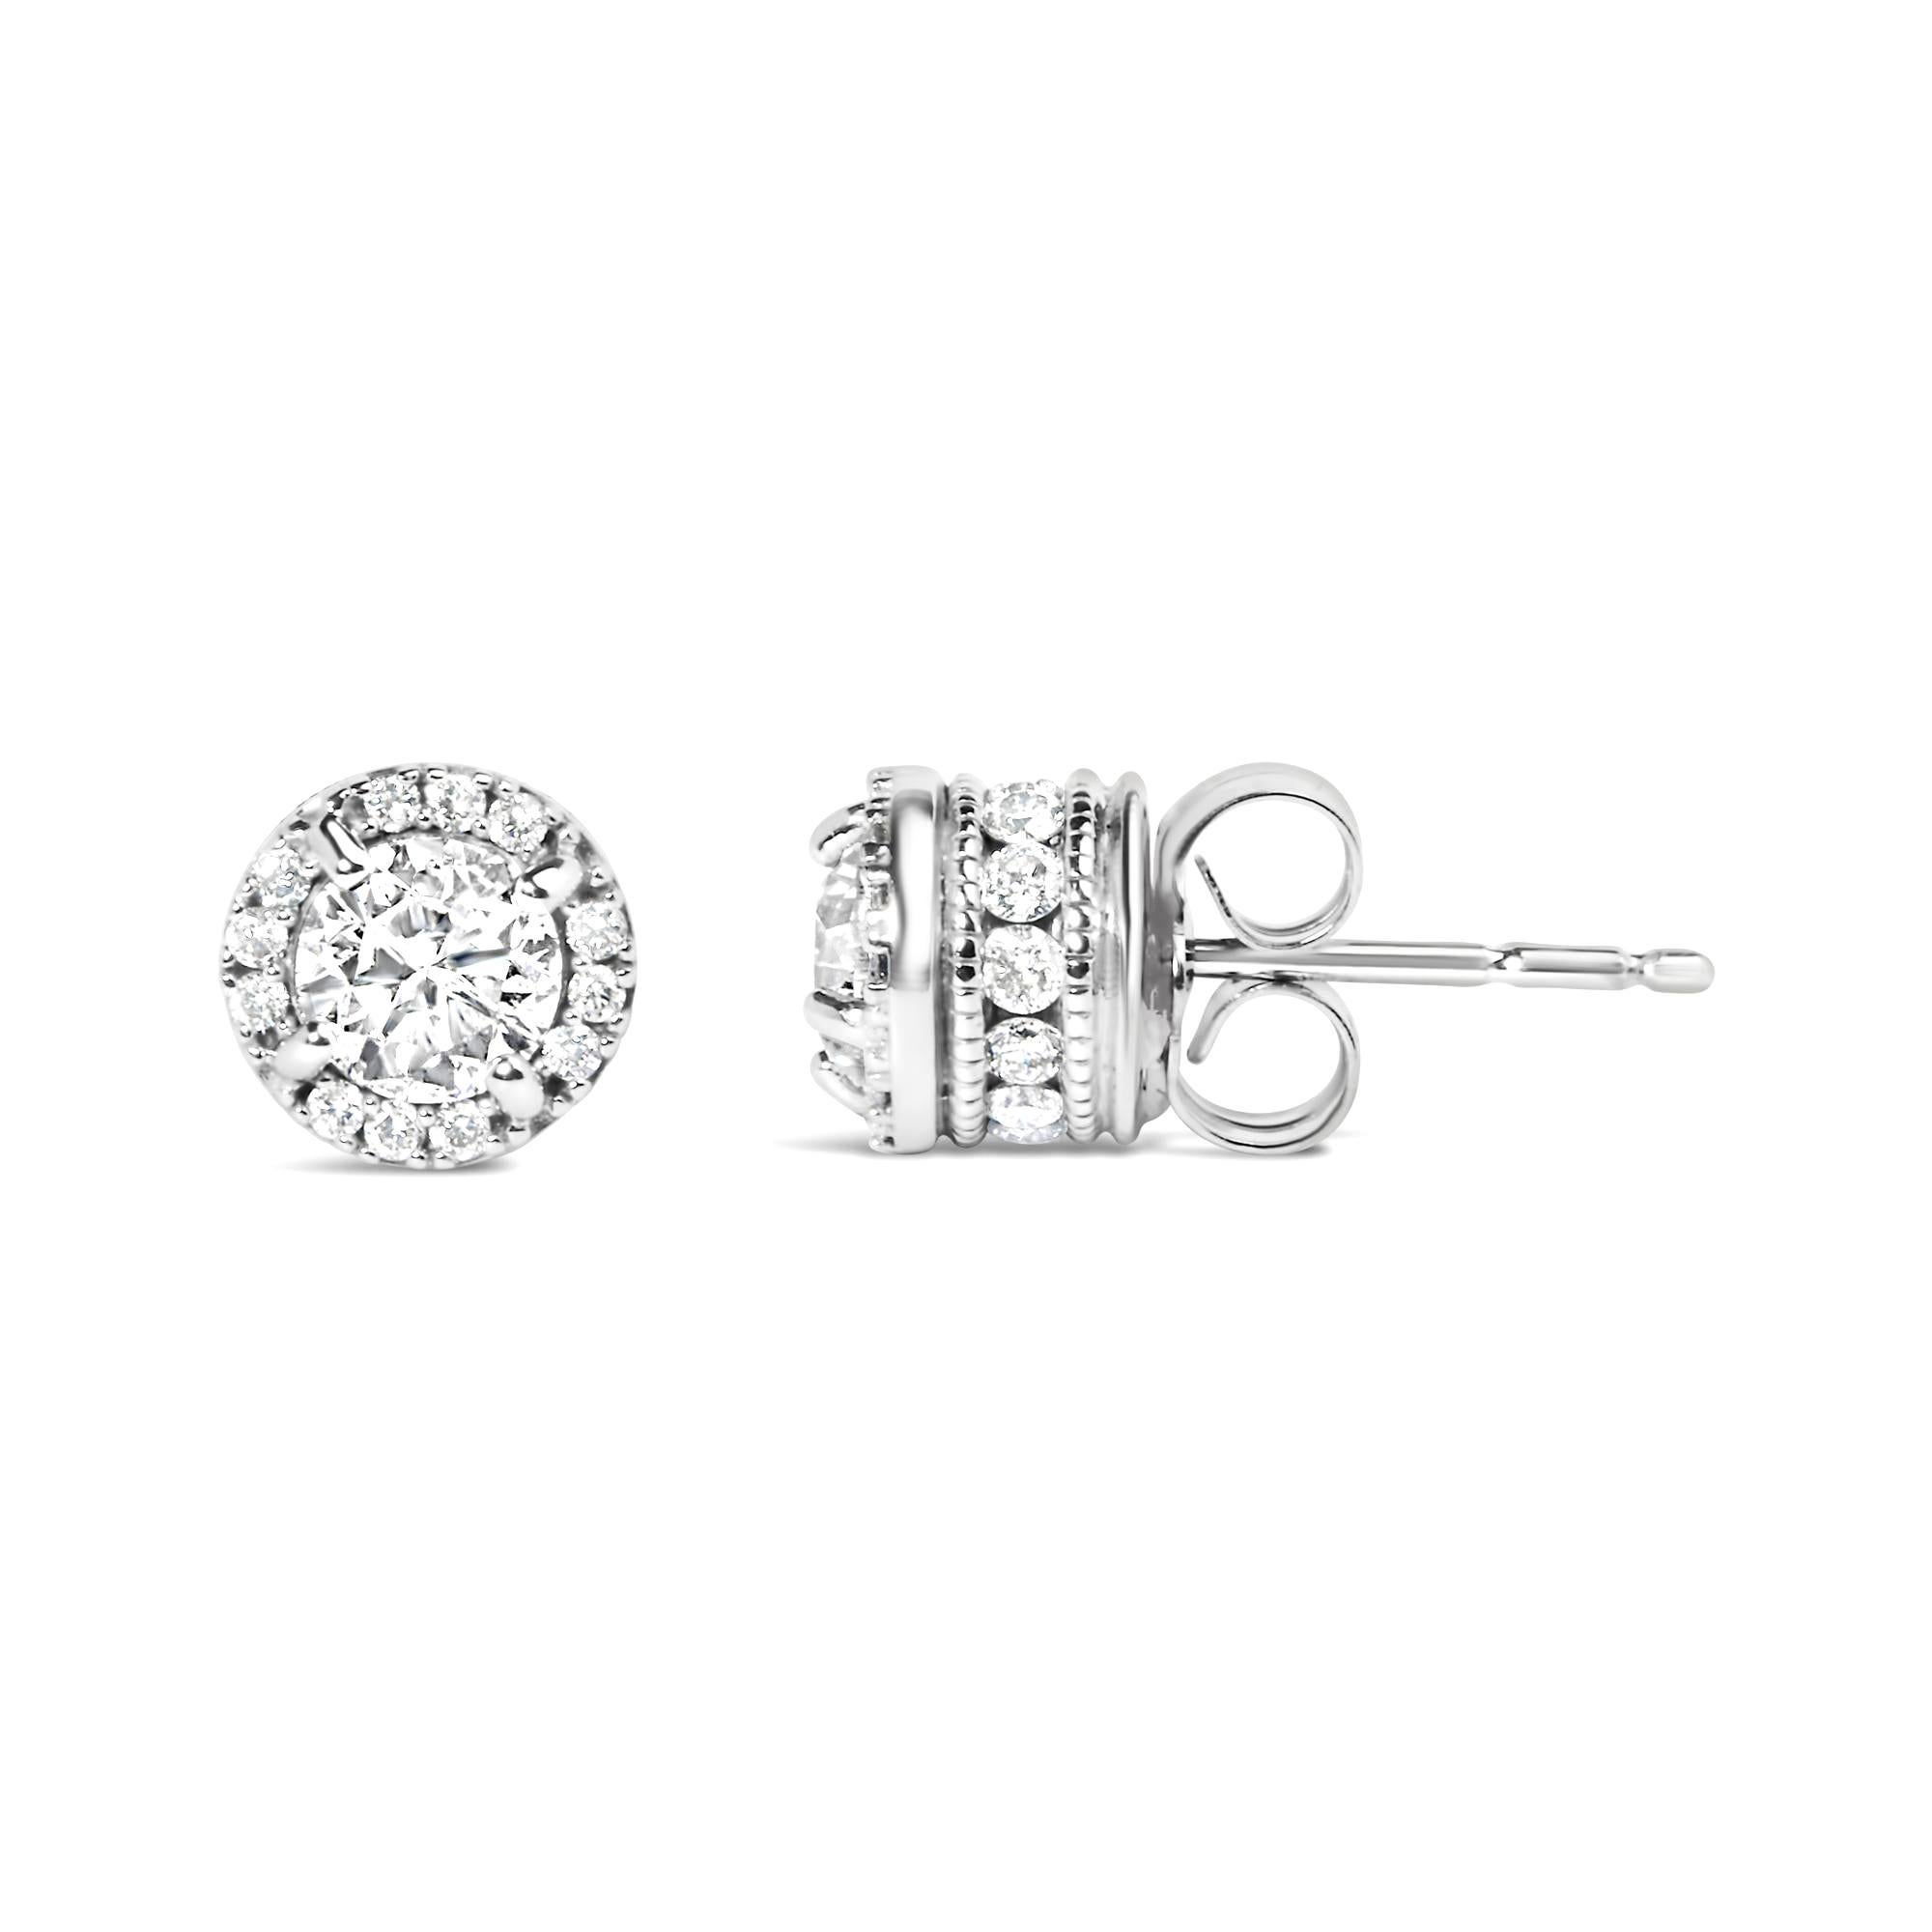 Diamond Stud Earrings Hidden Diamond Halo 1.02 Carats 10K White Gold In Excellent Condition For Sale In Laguna Niguel, CA